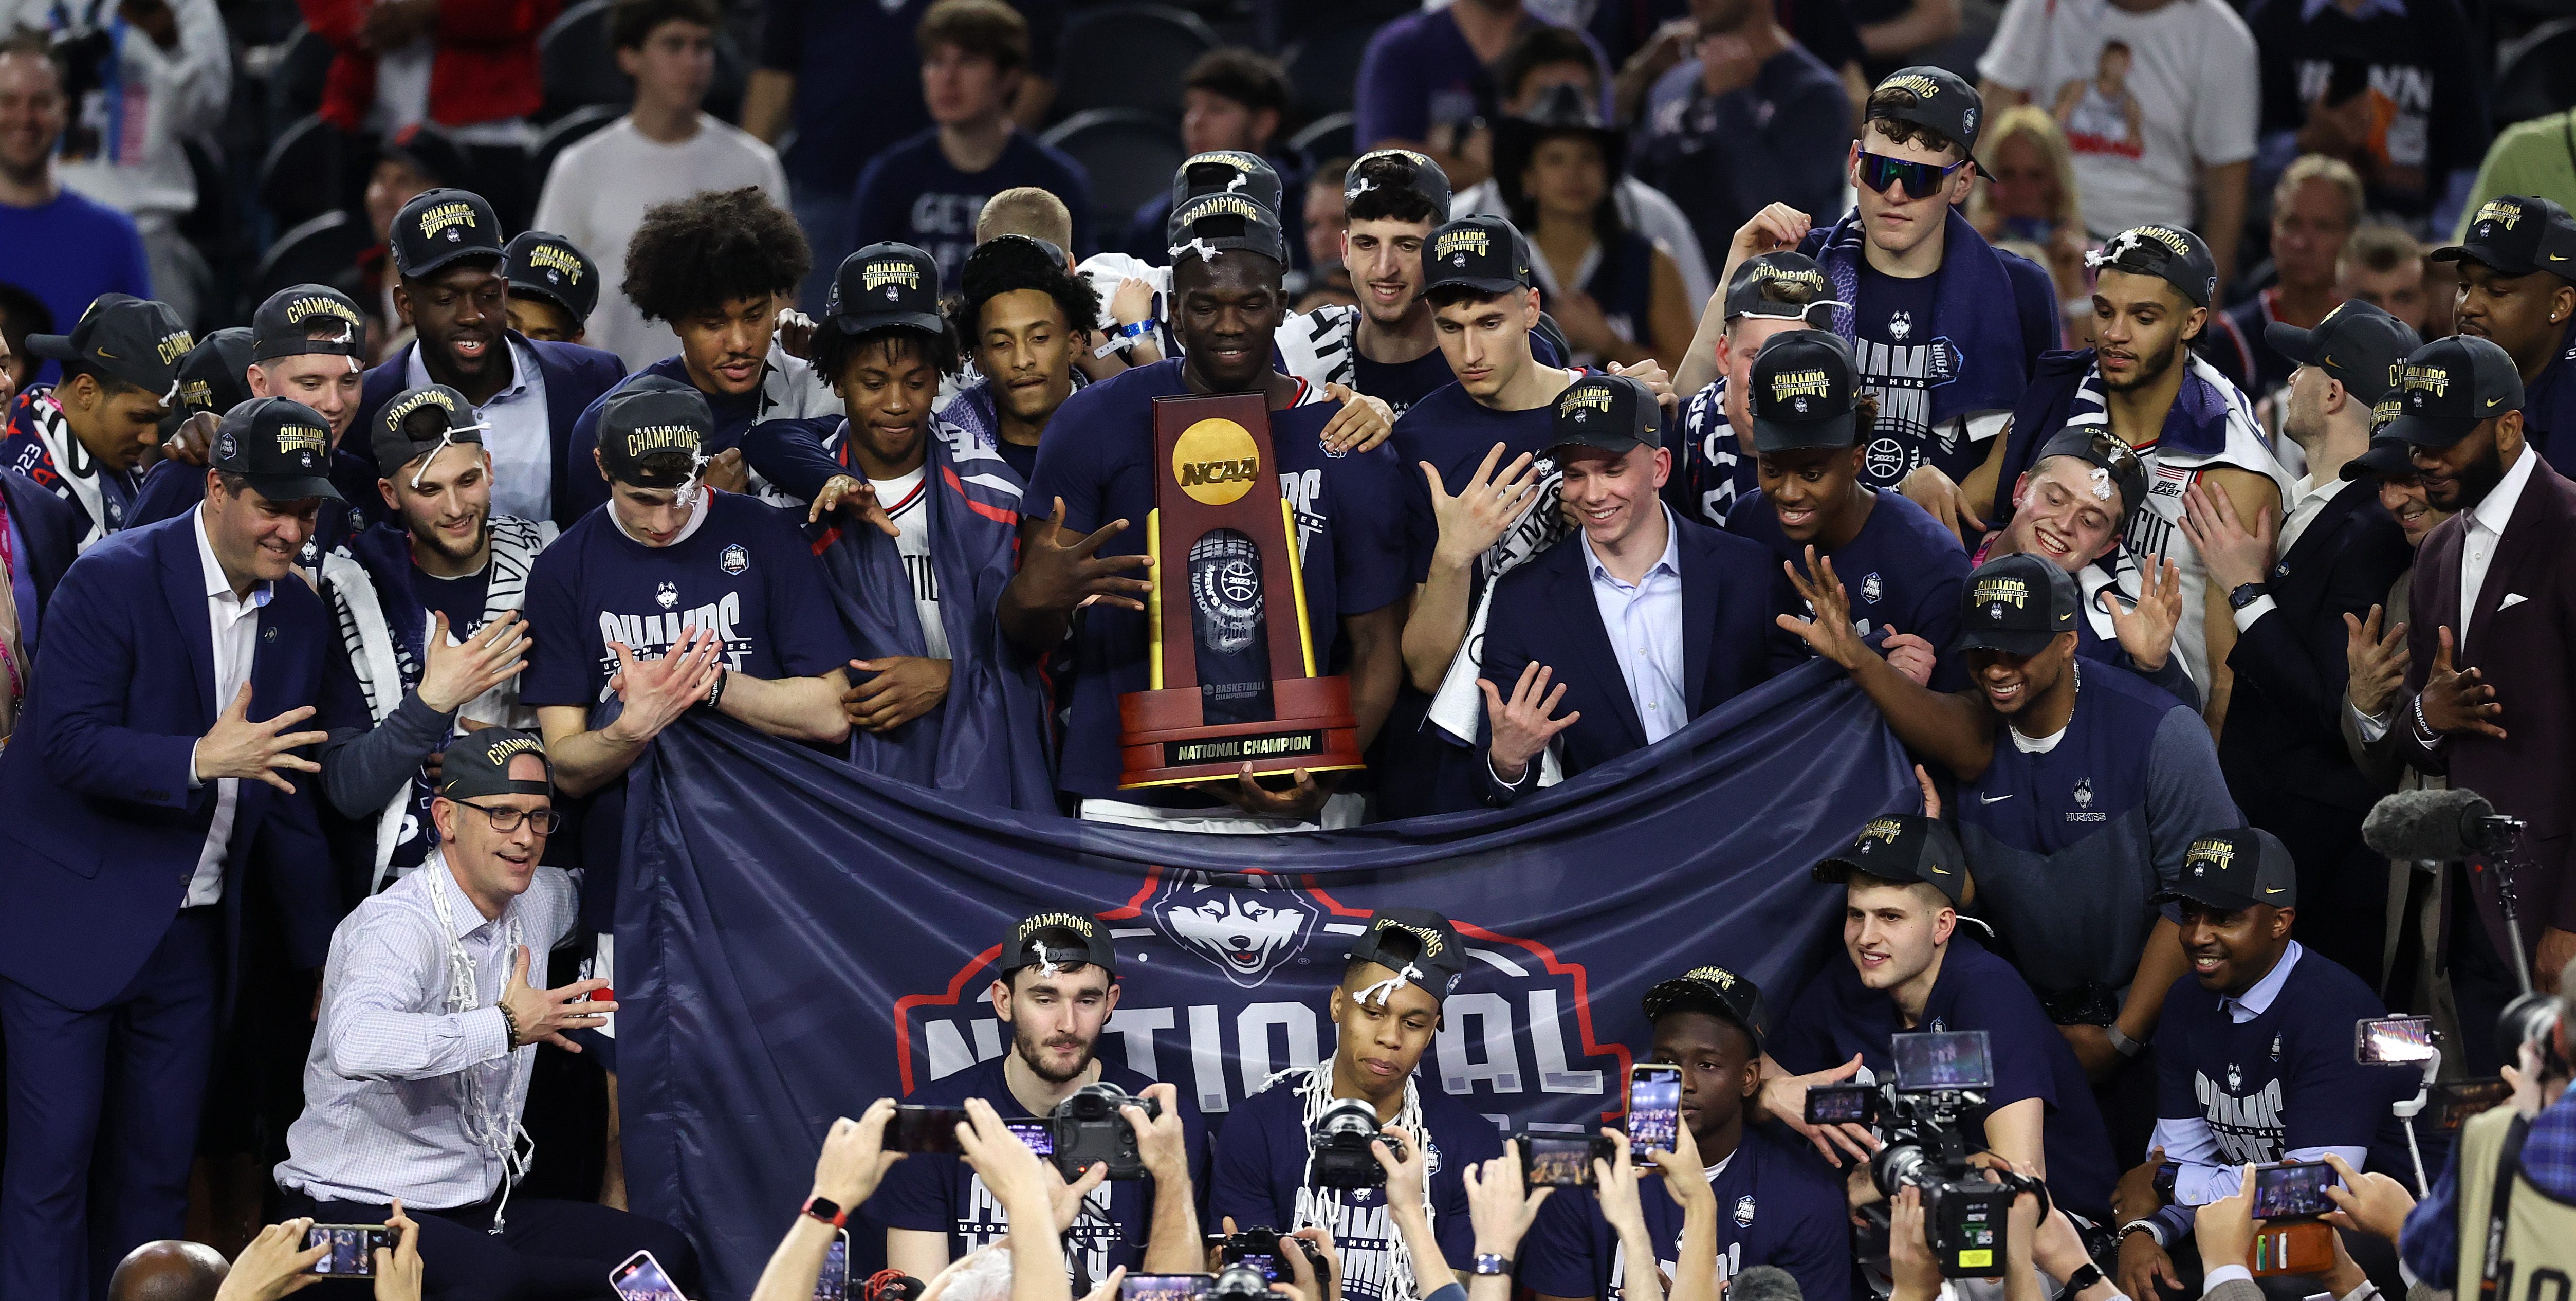 UConn looks to repeat 2011 March Madness history with another NCAA  basketball championship in Houston